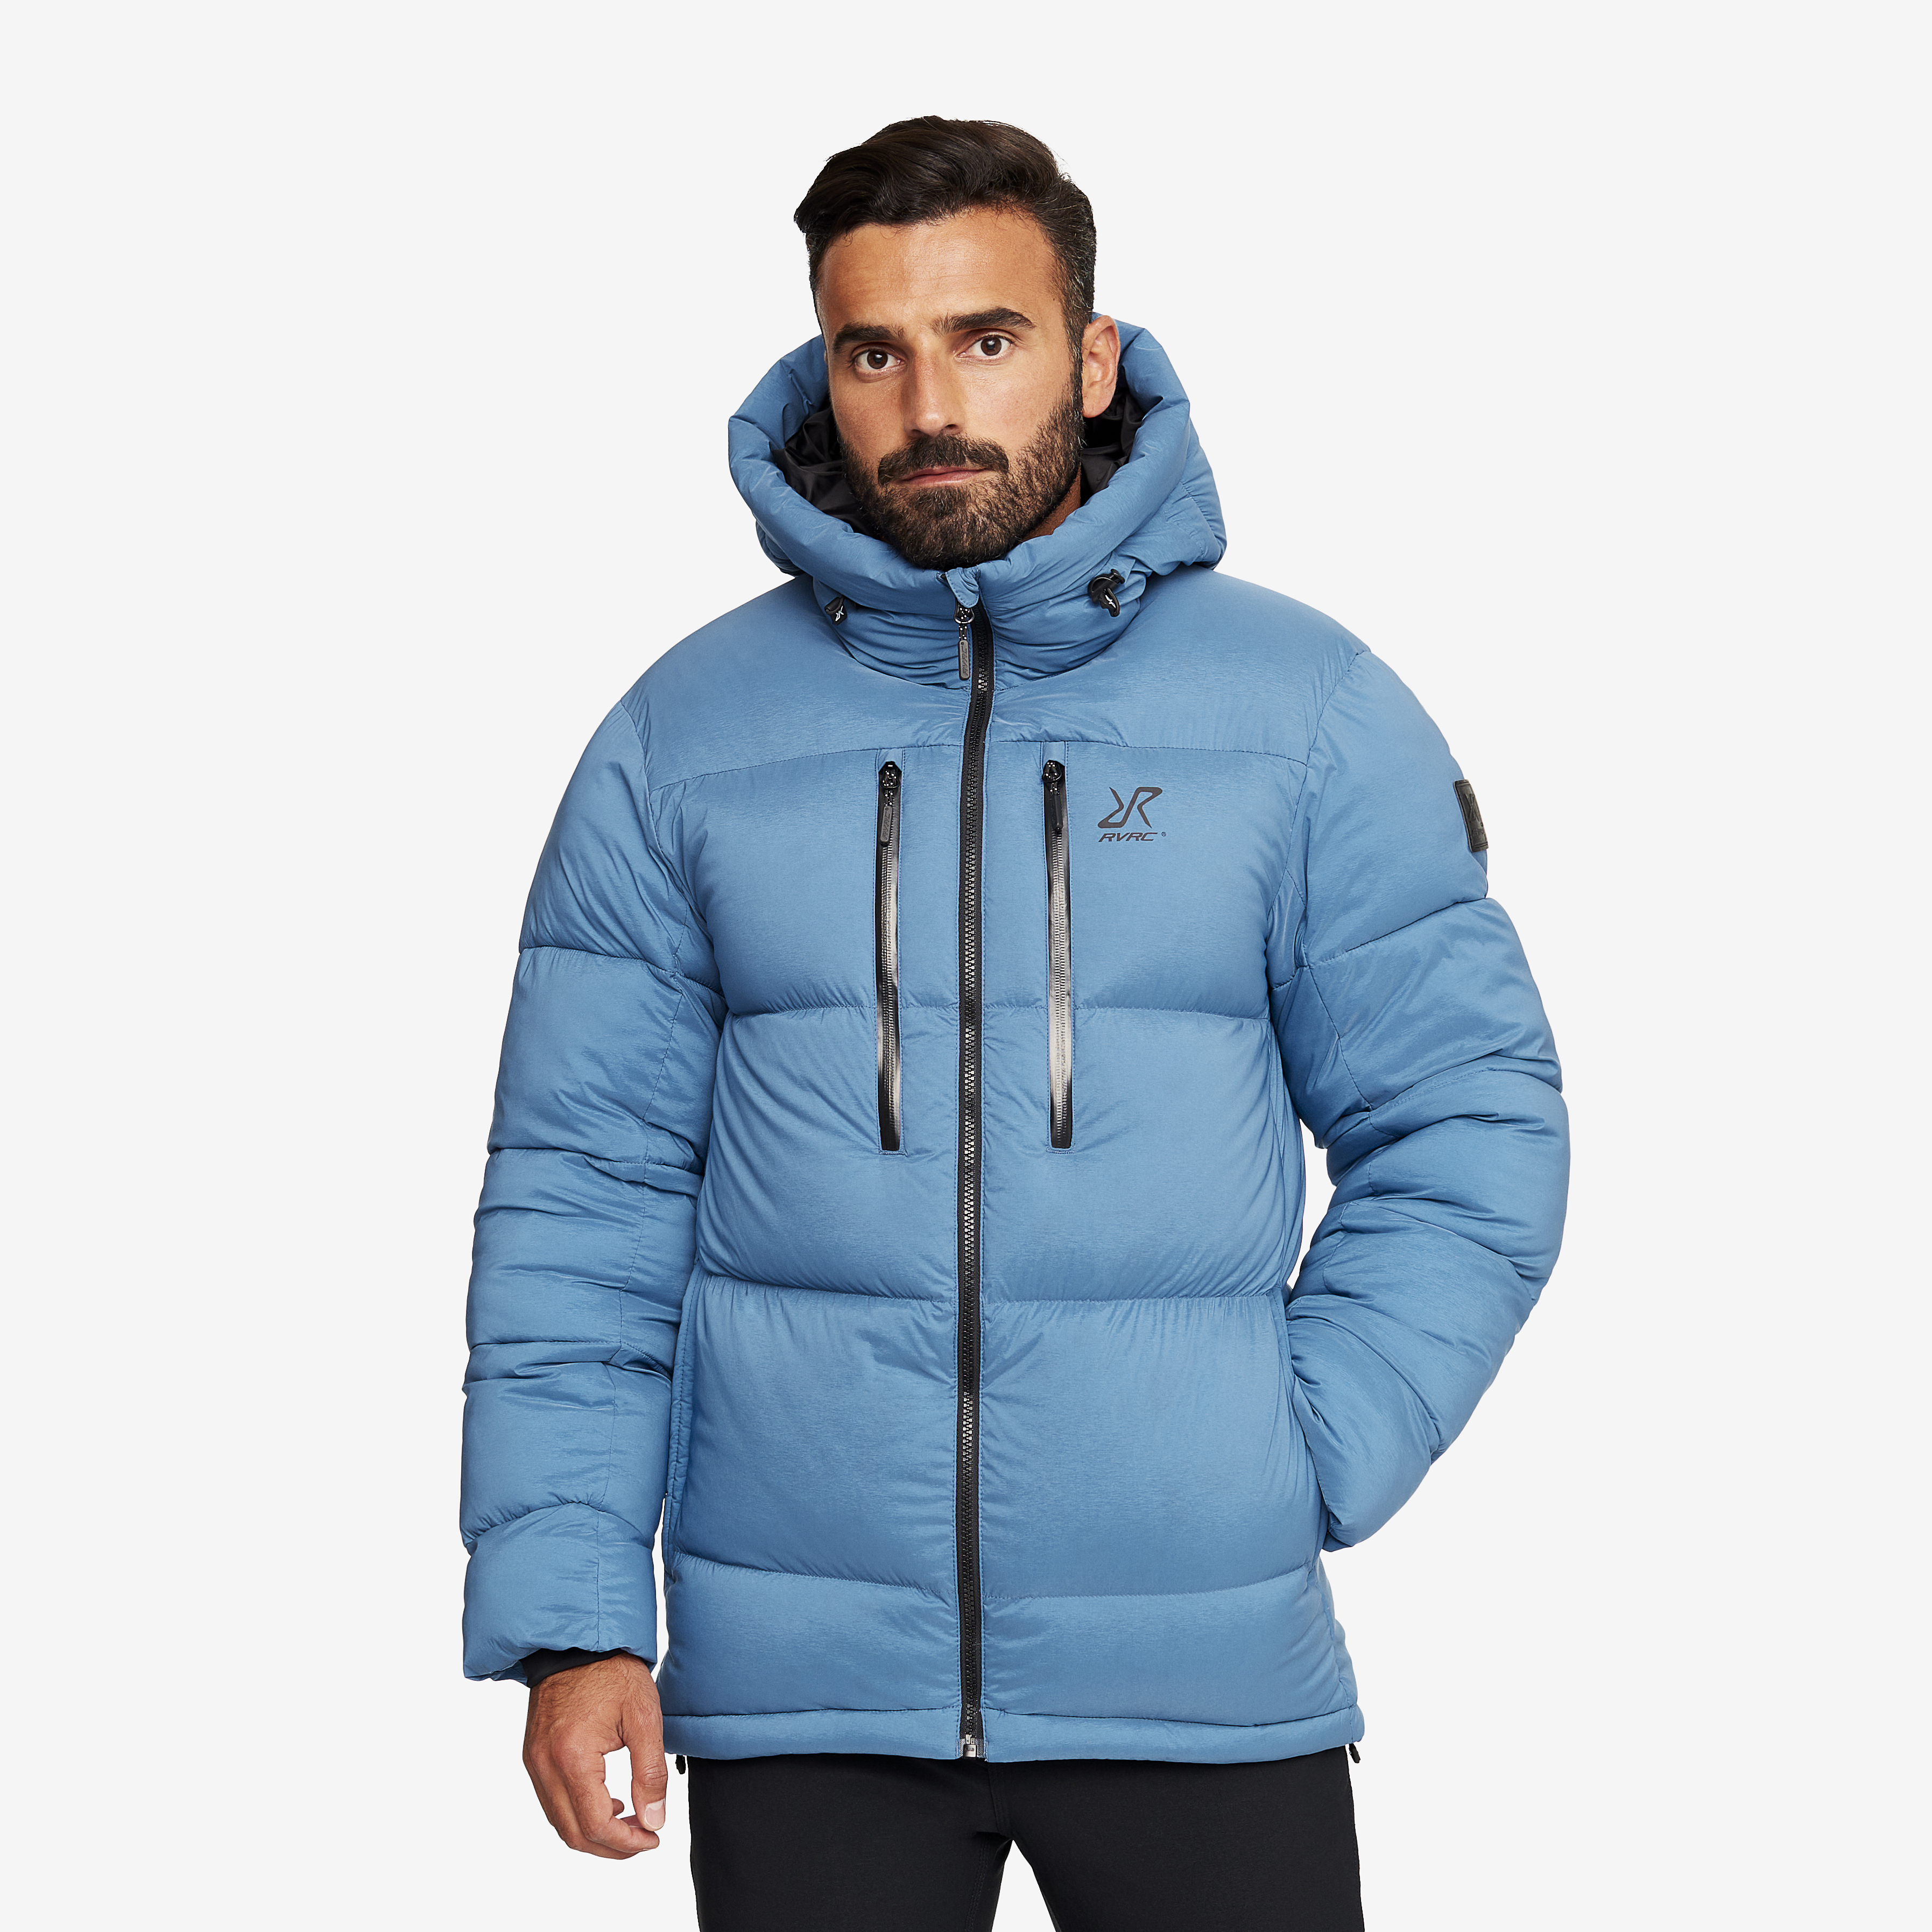 Flexpedition Jacket Pacific Blue